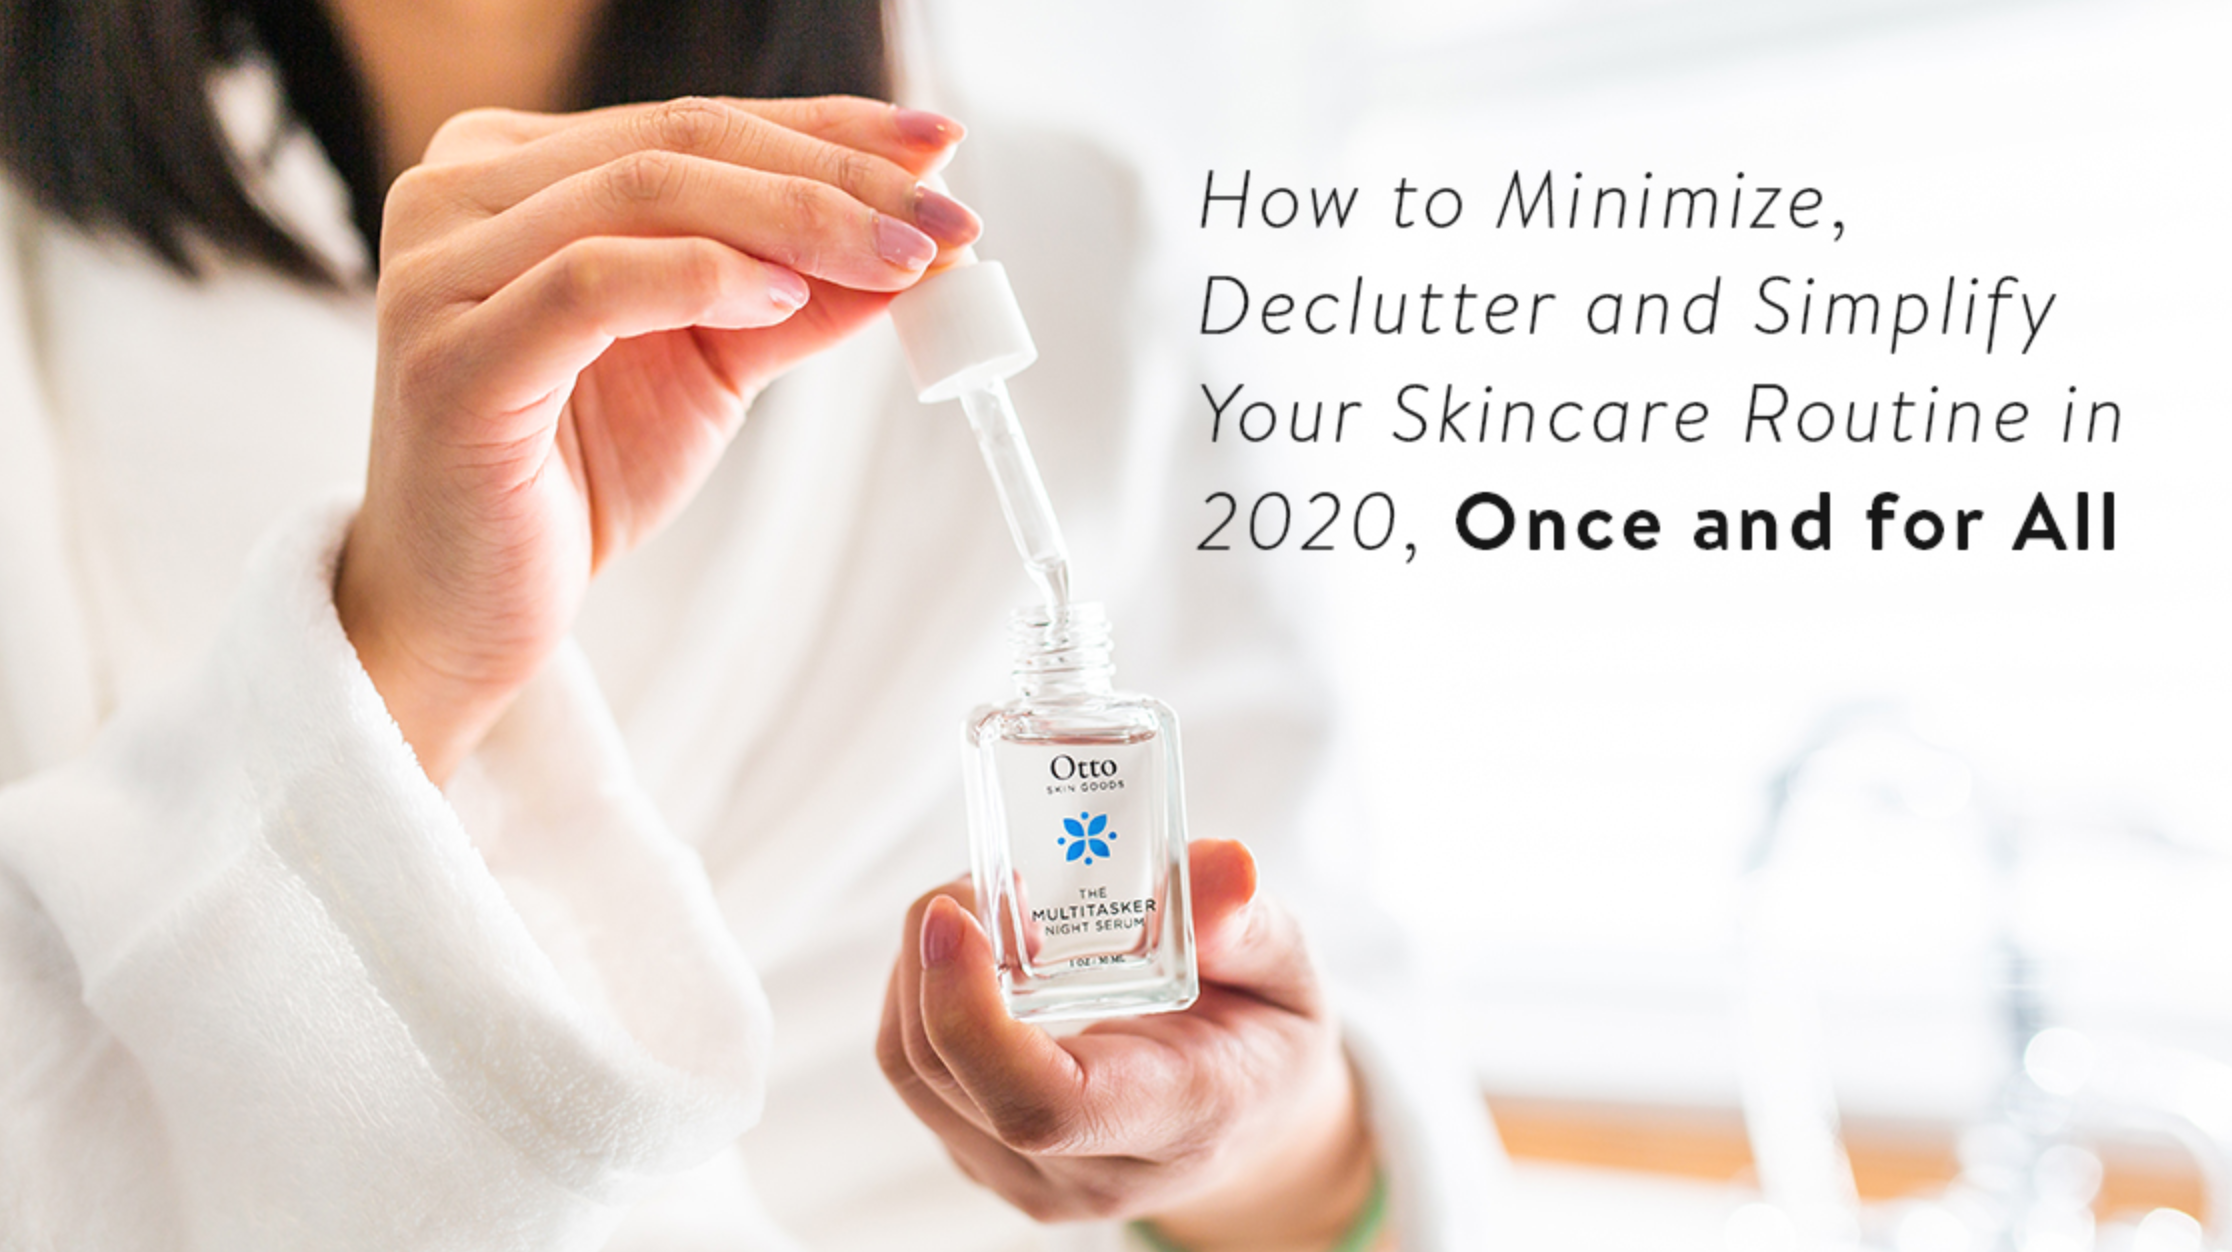 How to Minimize, Declutter and Simplify Your Skincare Routine in 2020, Once and for All